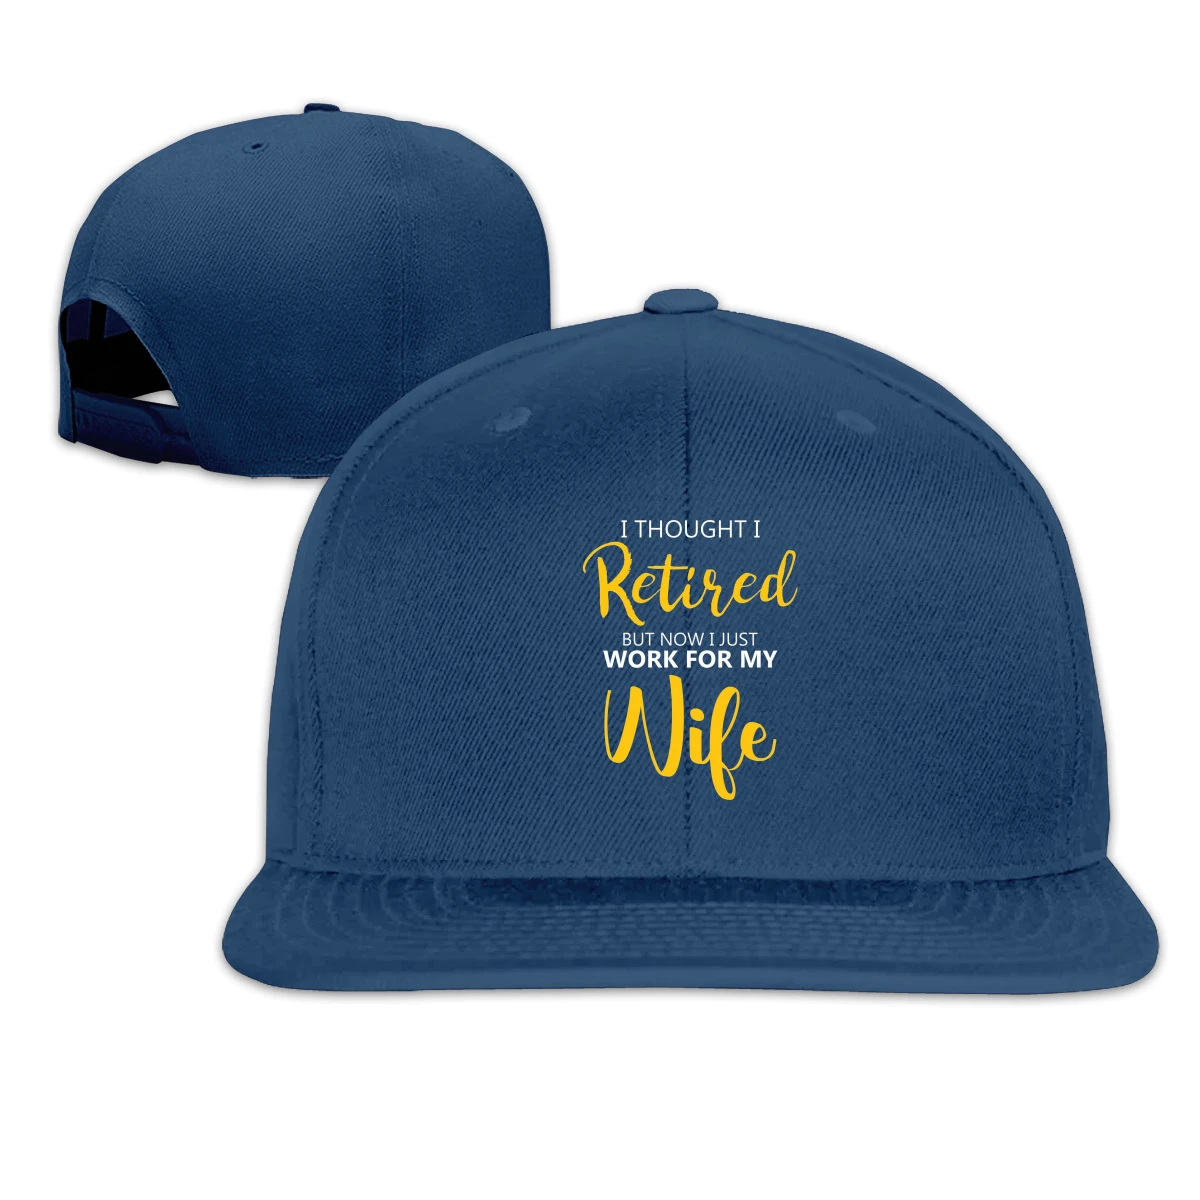 

Retired Now I Just Work For My Wife man women's Fashionable breathable Baseball Cap